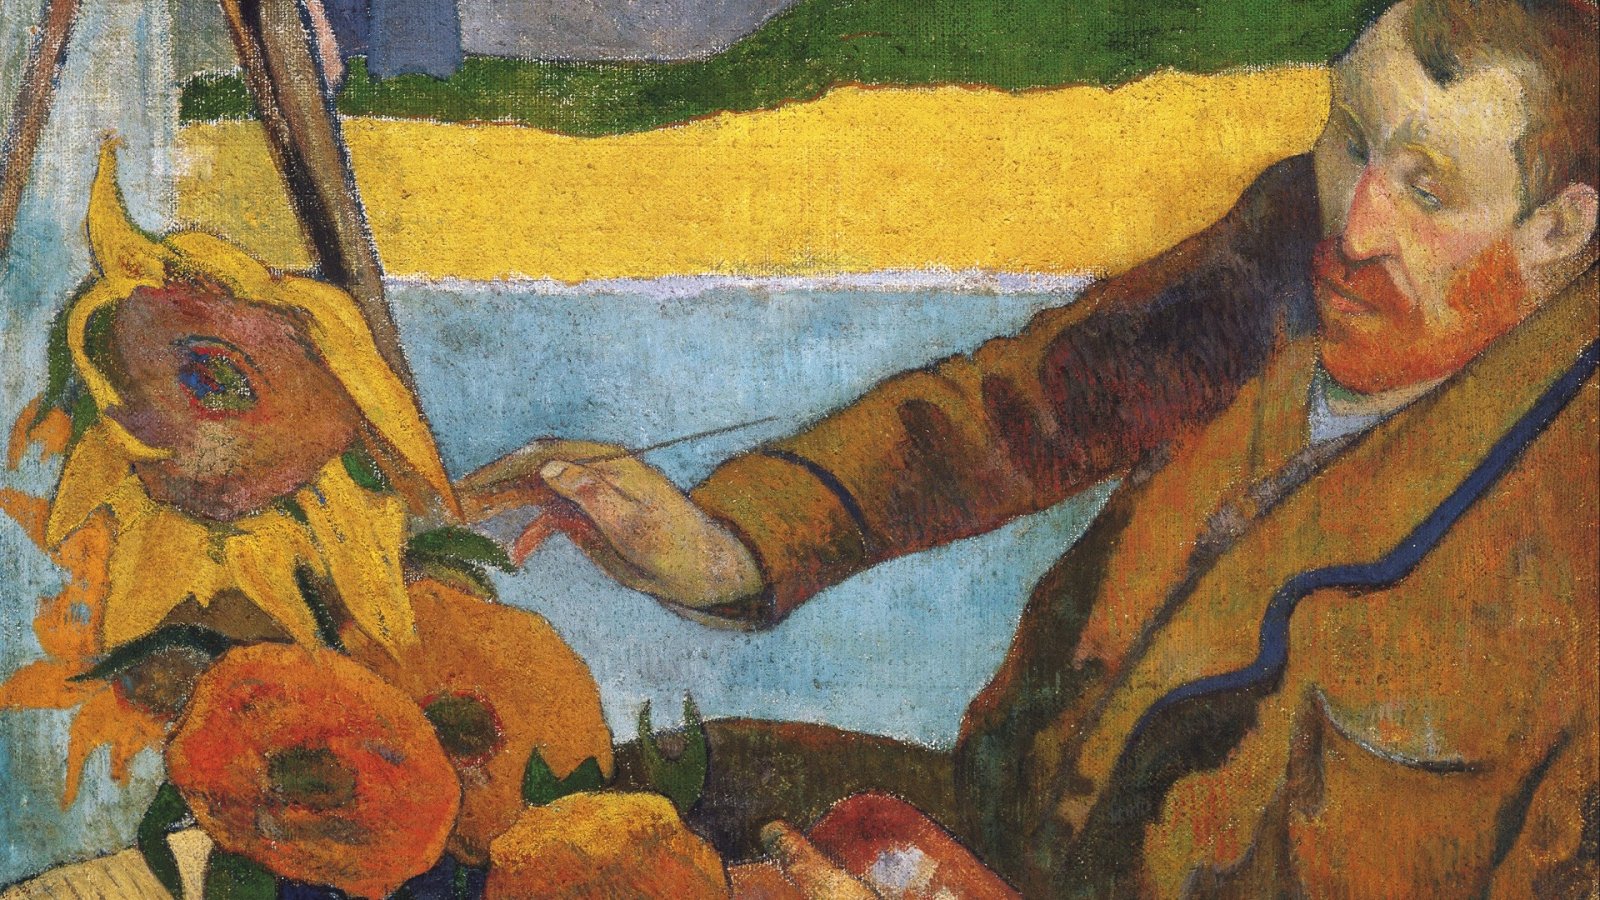 A legal claim is being made over the ownership of Van Gogh's Sunflowers painting